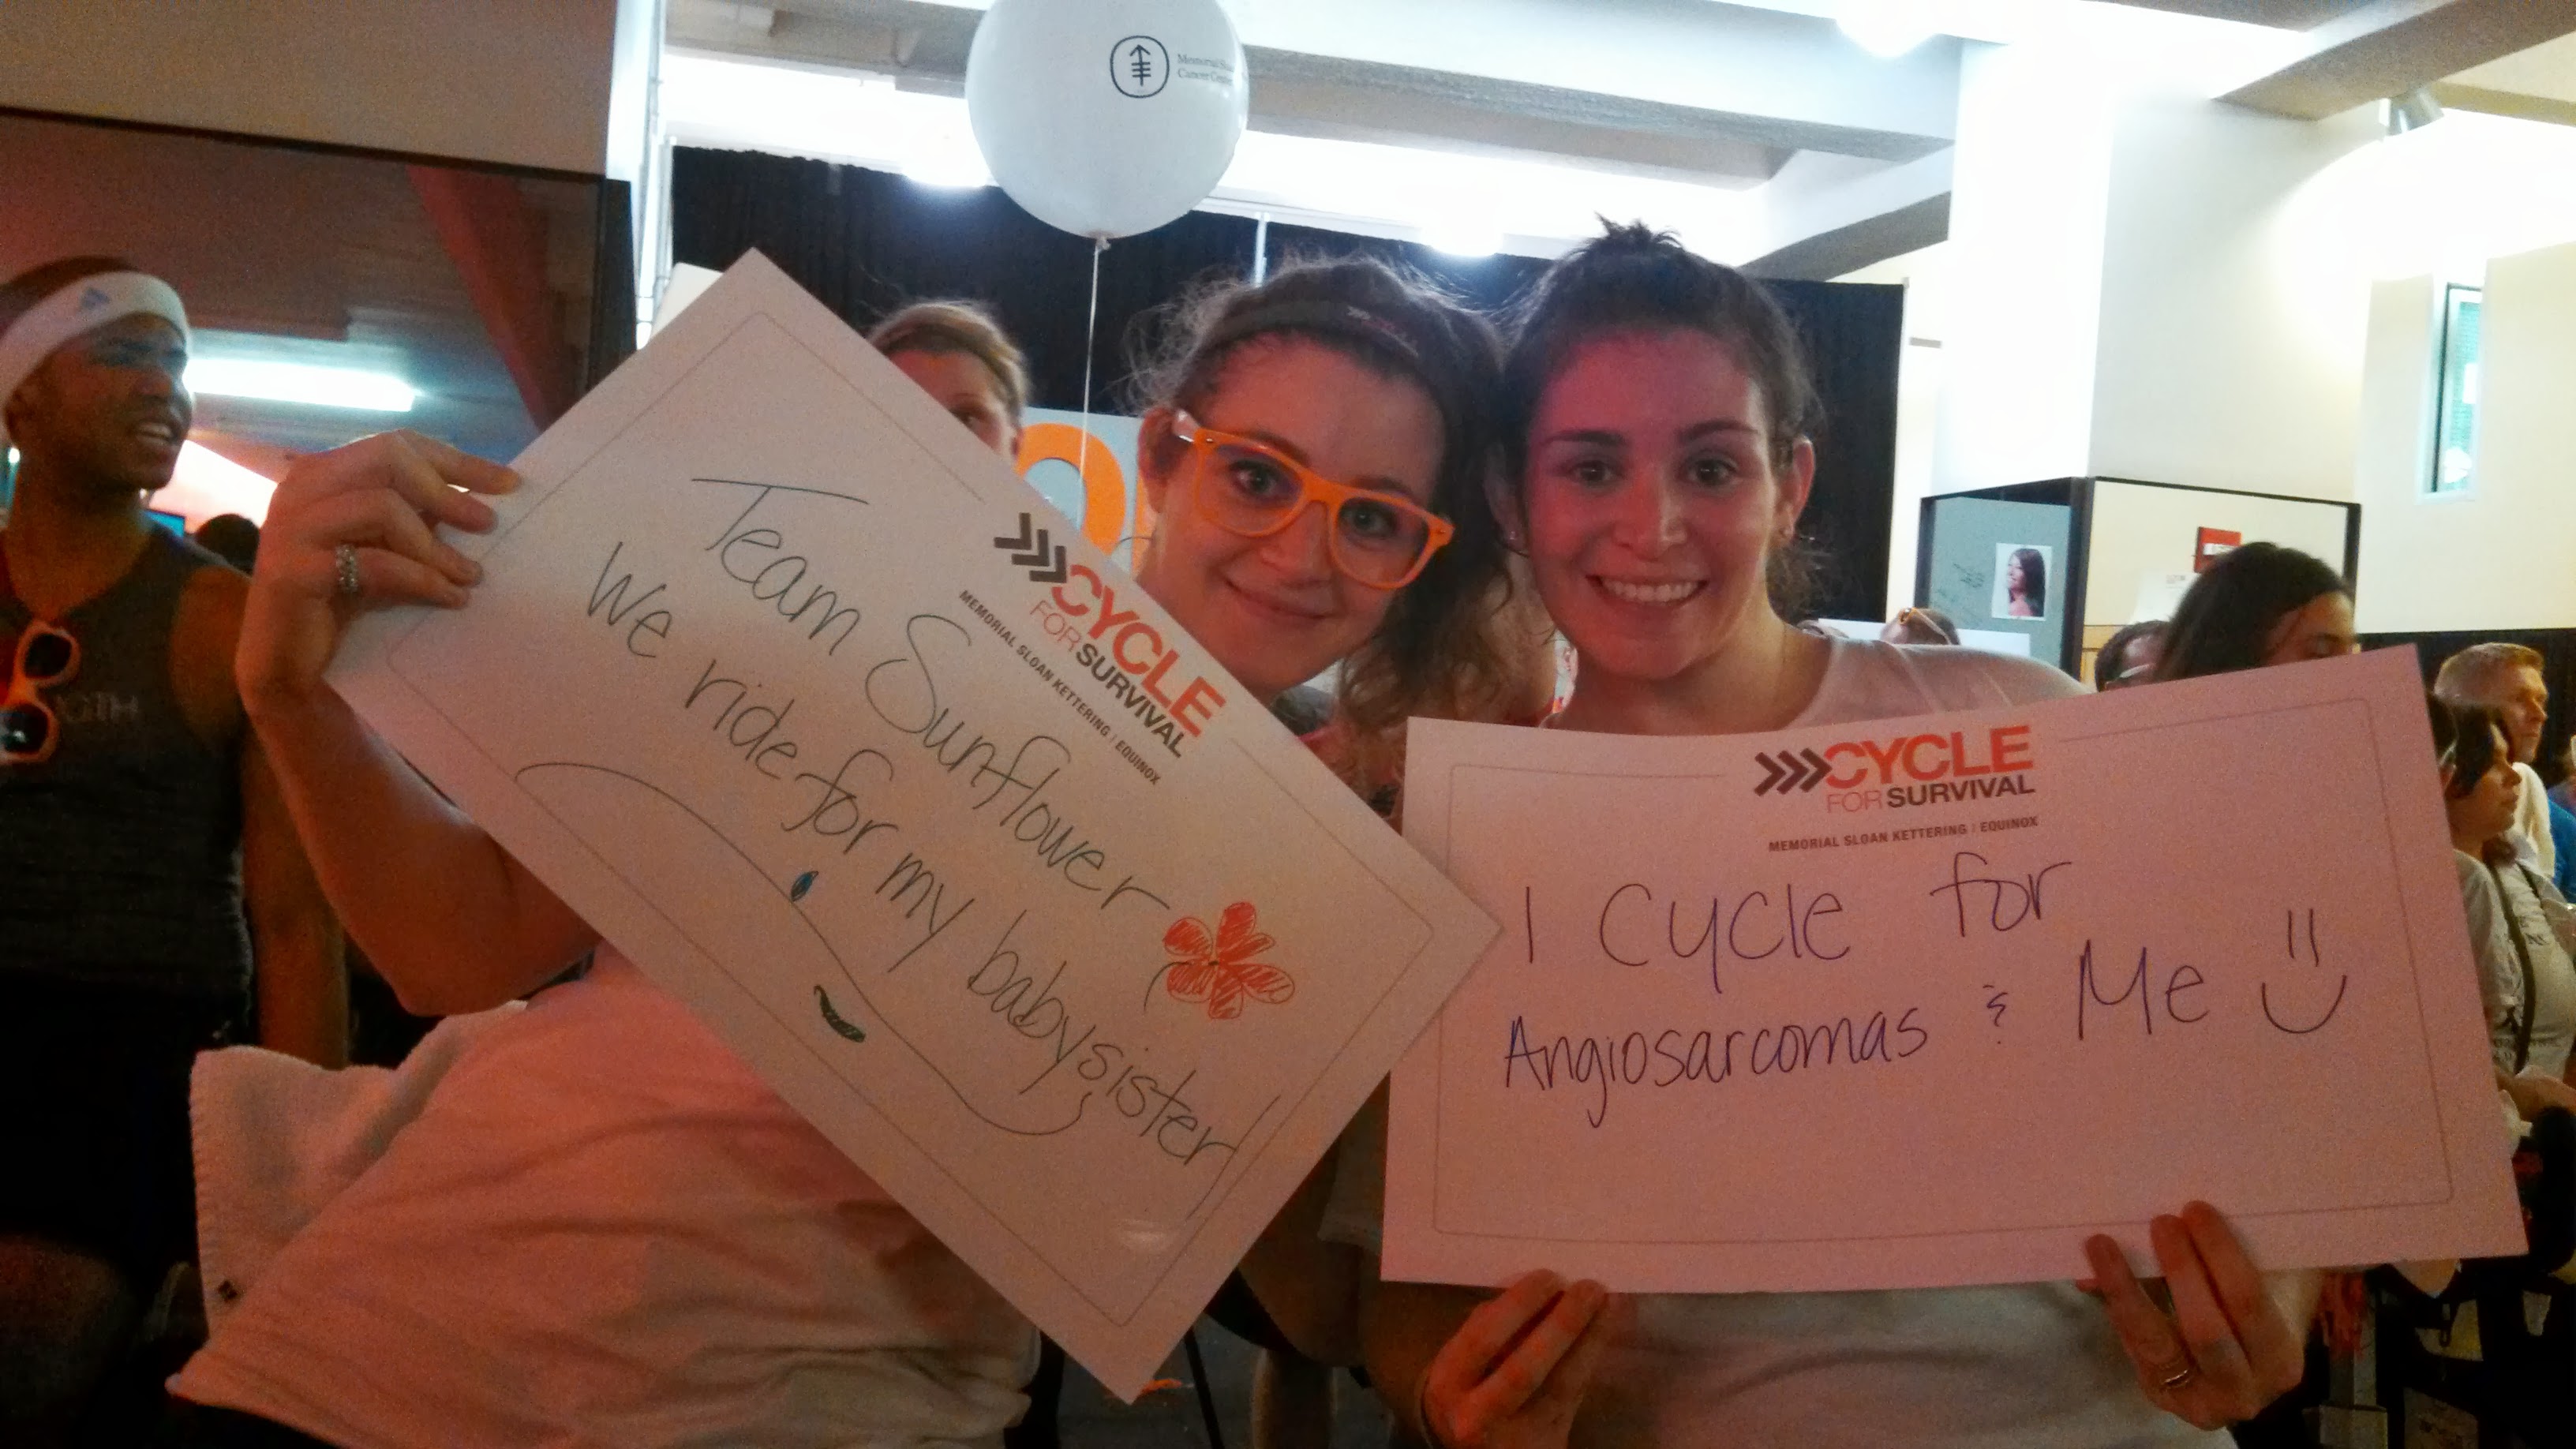 Rachel and sister at a Cycle for survival event